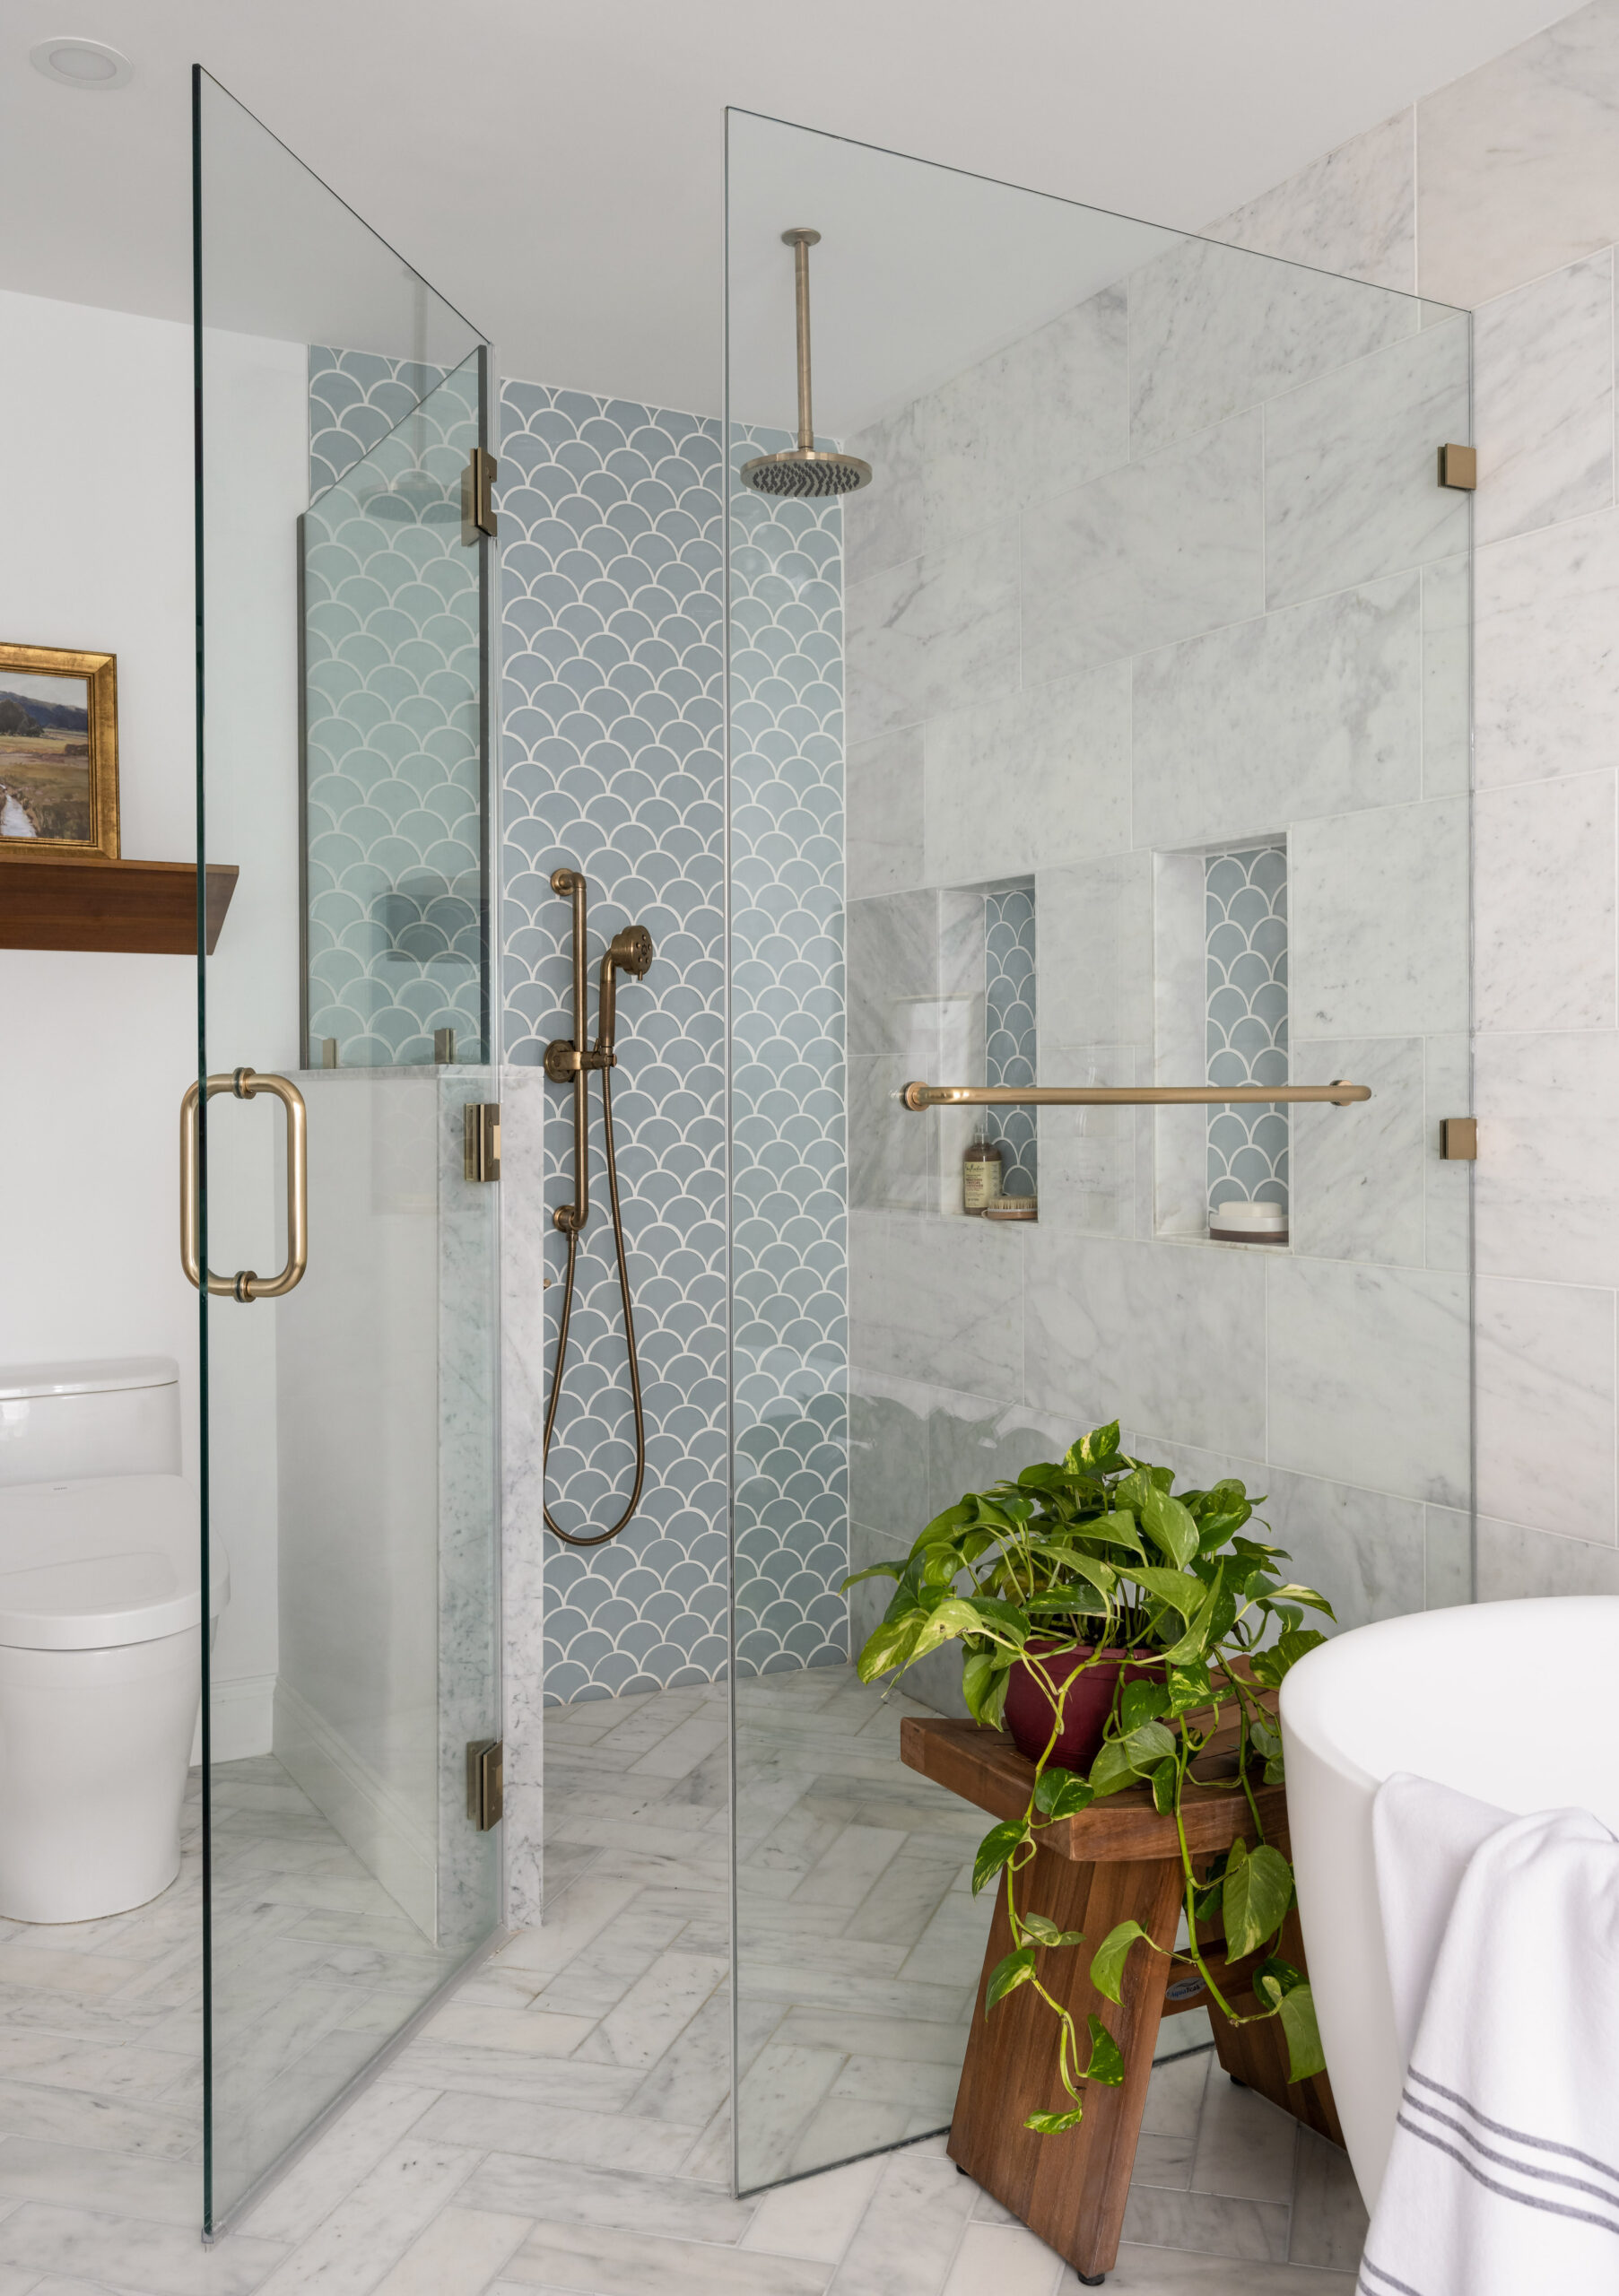 Needham Luxury master bathroom retreat with curbless shower and shower niches and light blue scallop tile